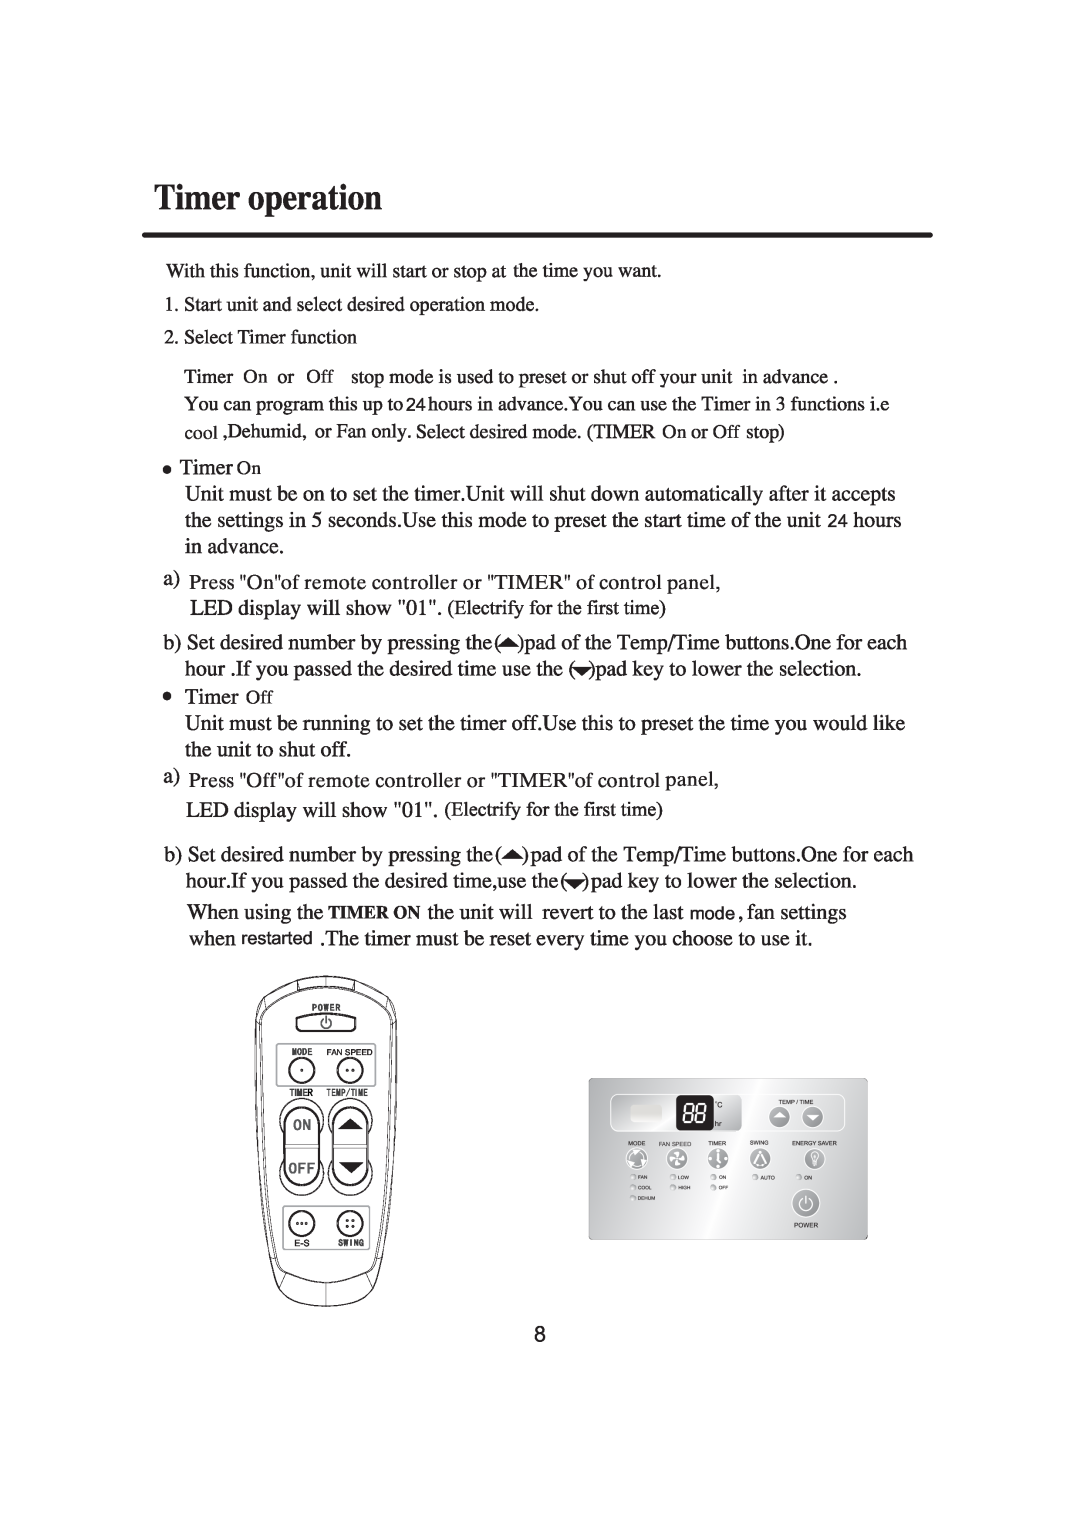 Haier HW-12LN03, HW-09LN03, 0010515690 TIMER ON mode, Press Onof remote controller or TIMER of control panel, Fan Speed 